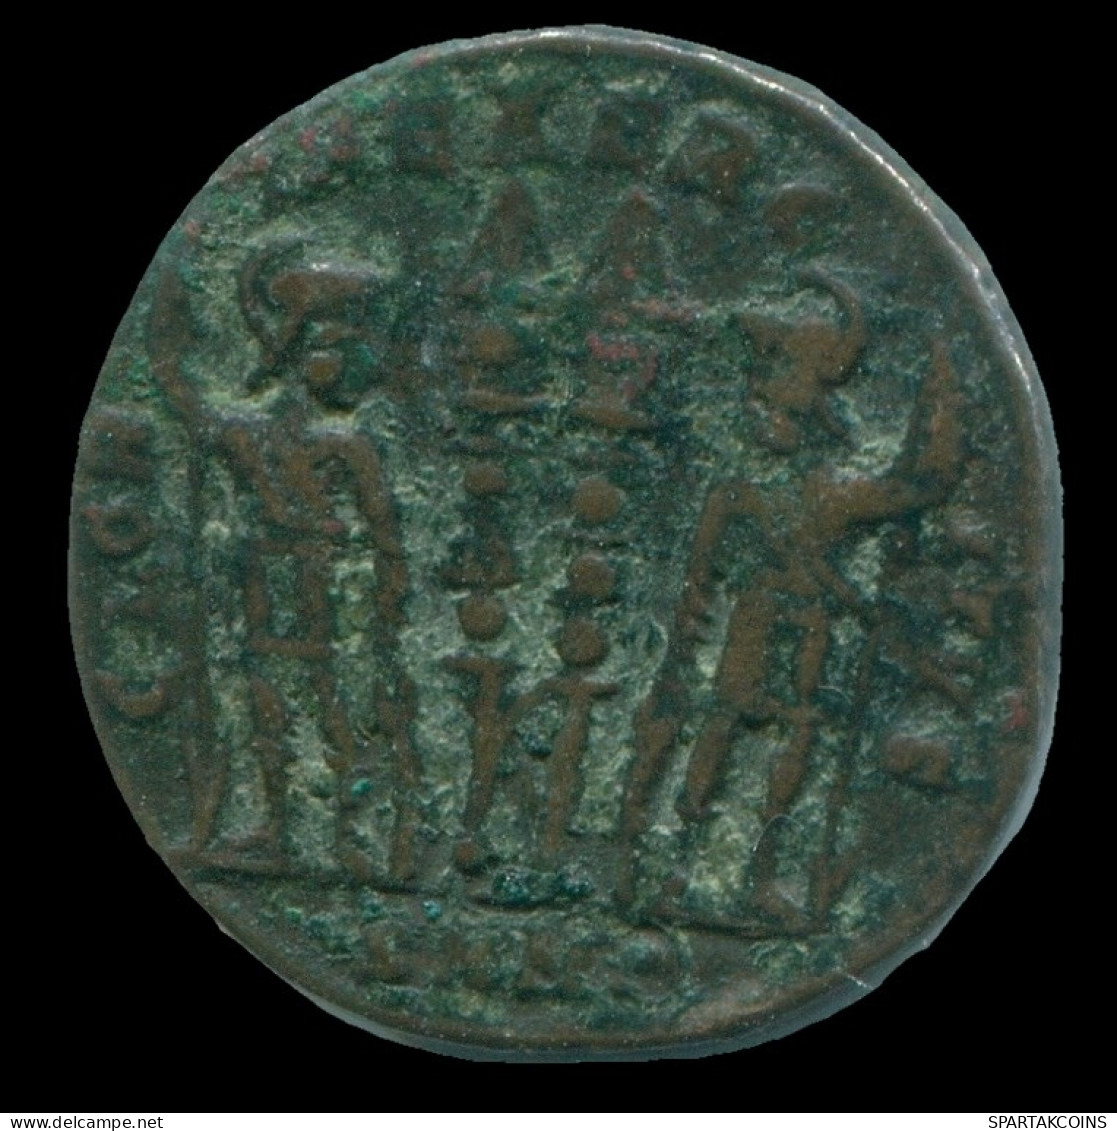 CONSTANTINE I NICOMEDIA Mint ( SMN ) TWO SOLDIERS #ANC13185.18.U.A - The Christian Empire (307 AD To 363 AD)